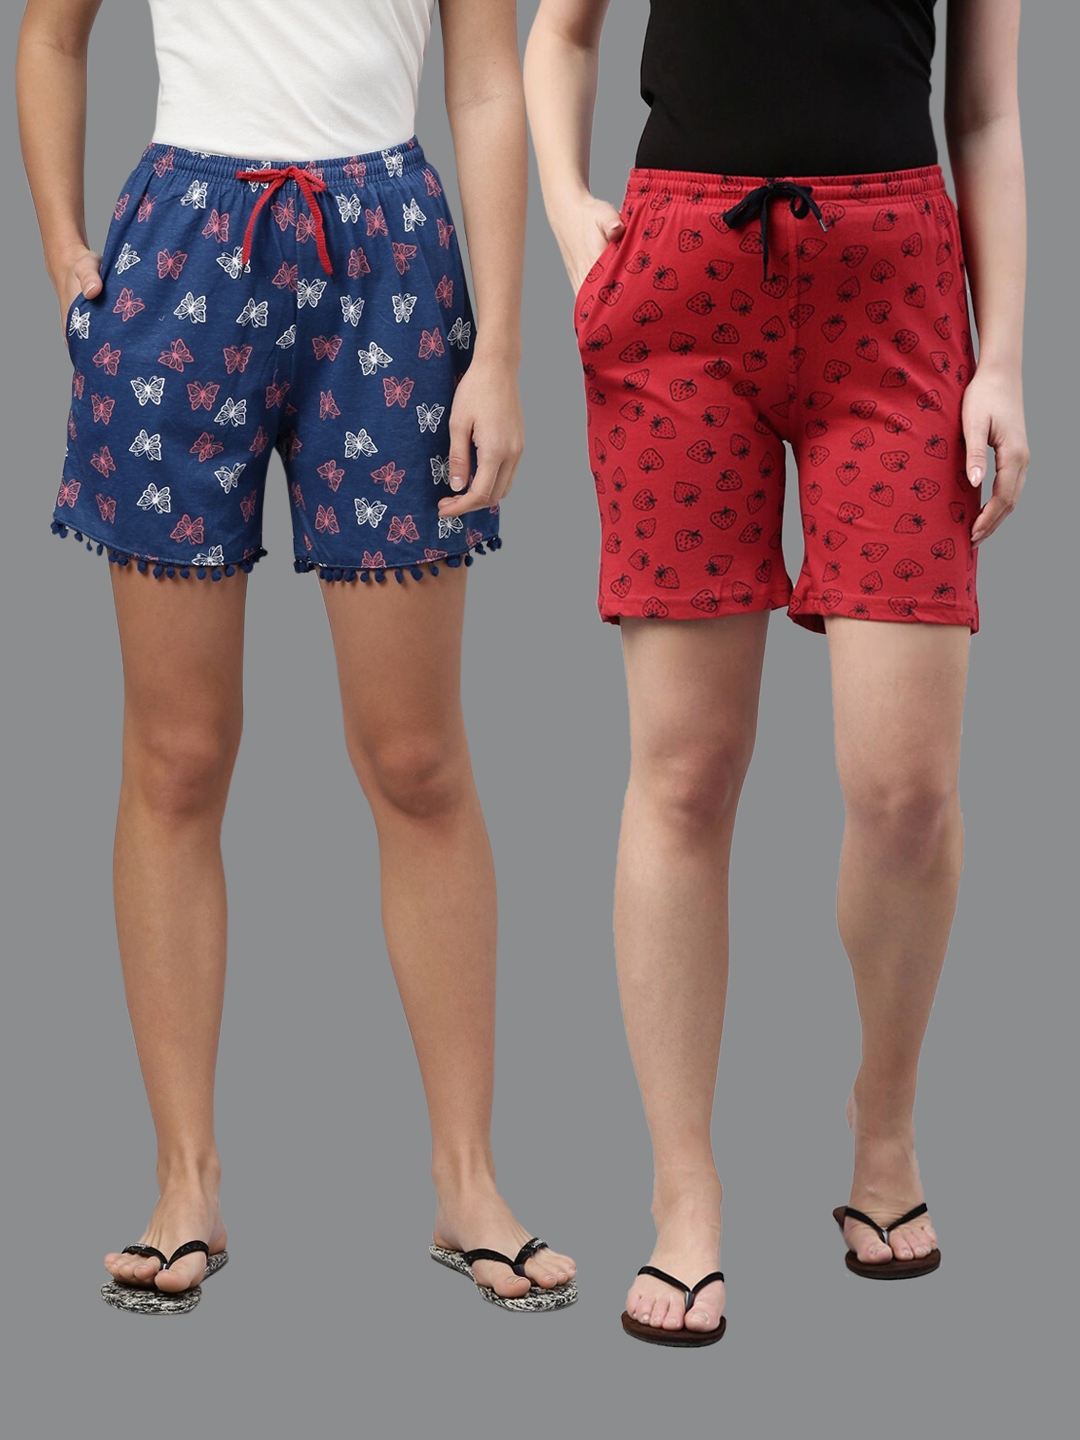 Kryptic | Kryptic Women's 100% Cotton Printed Shorts - Pack of 2 0